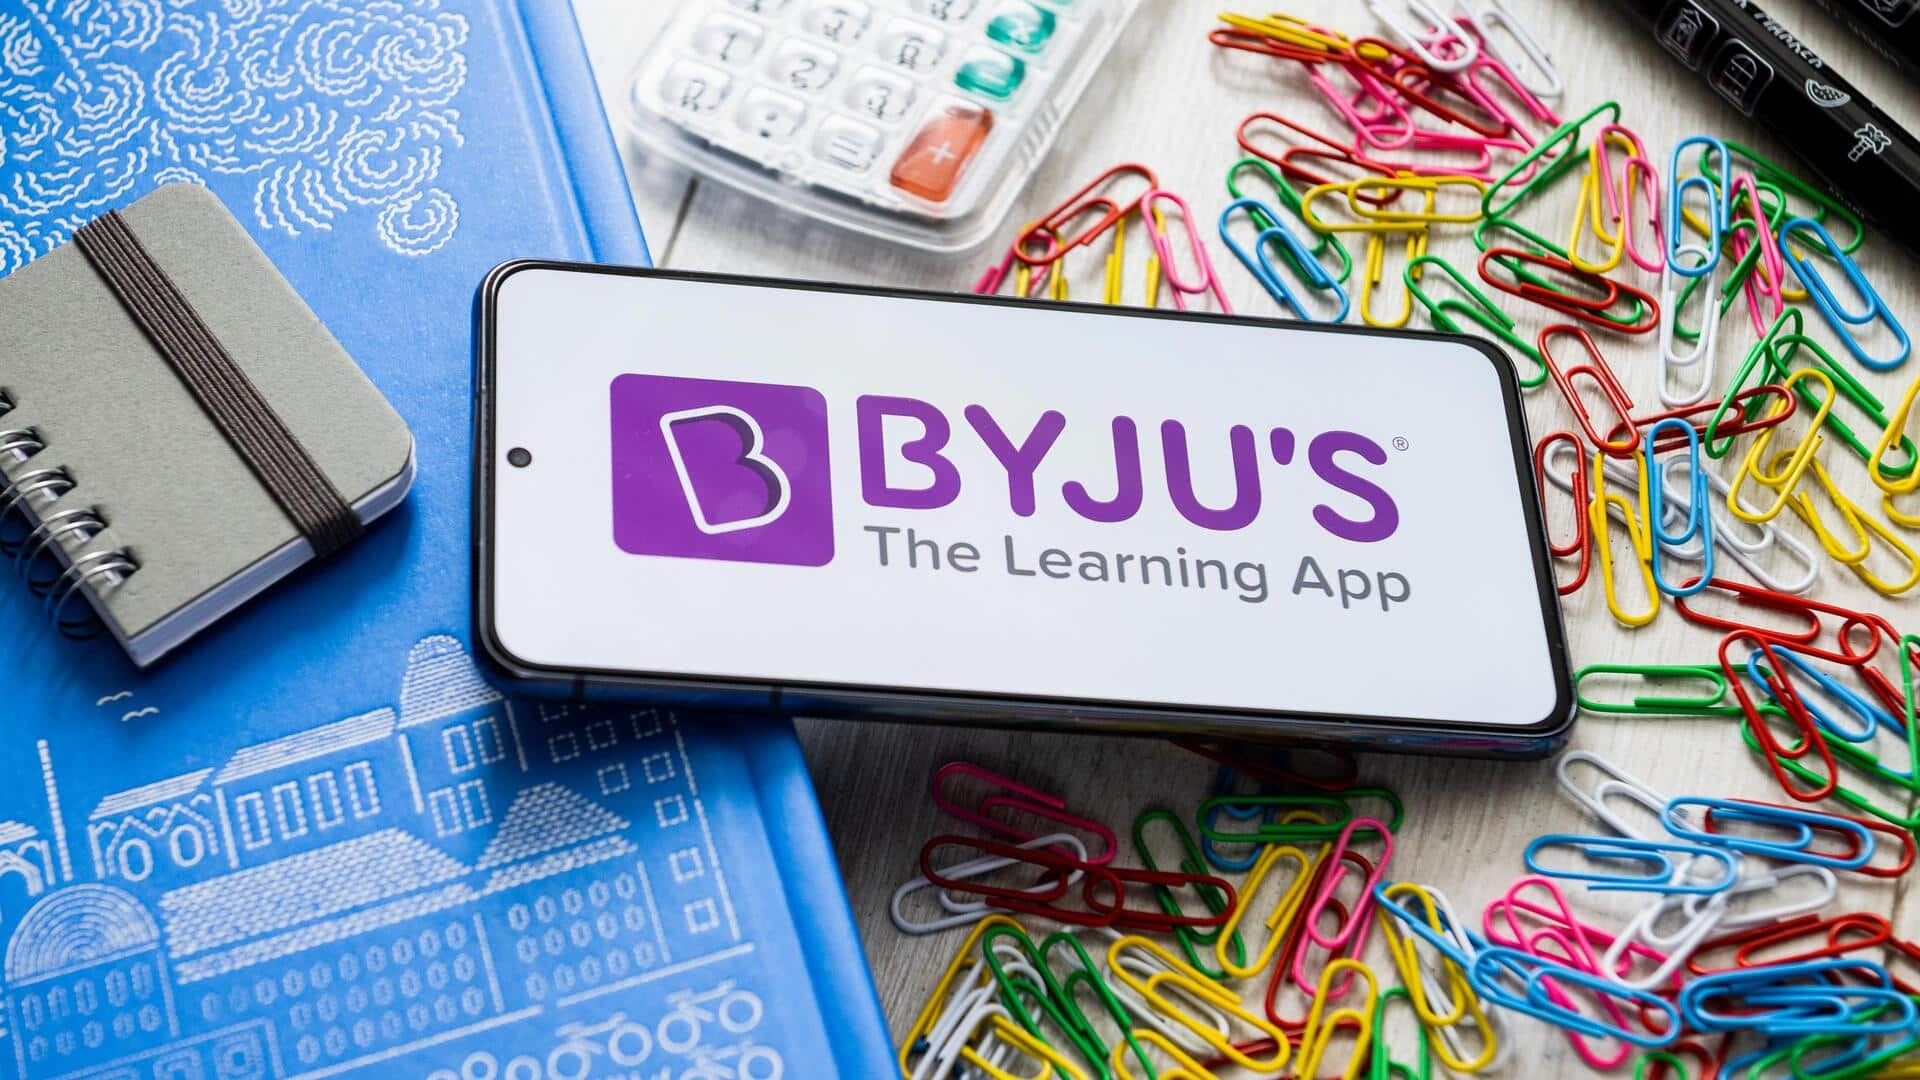 BYJU's to fire around 4,000 employees in major restructuring move